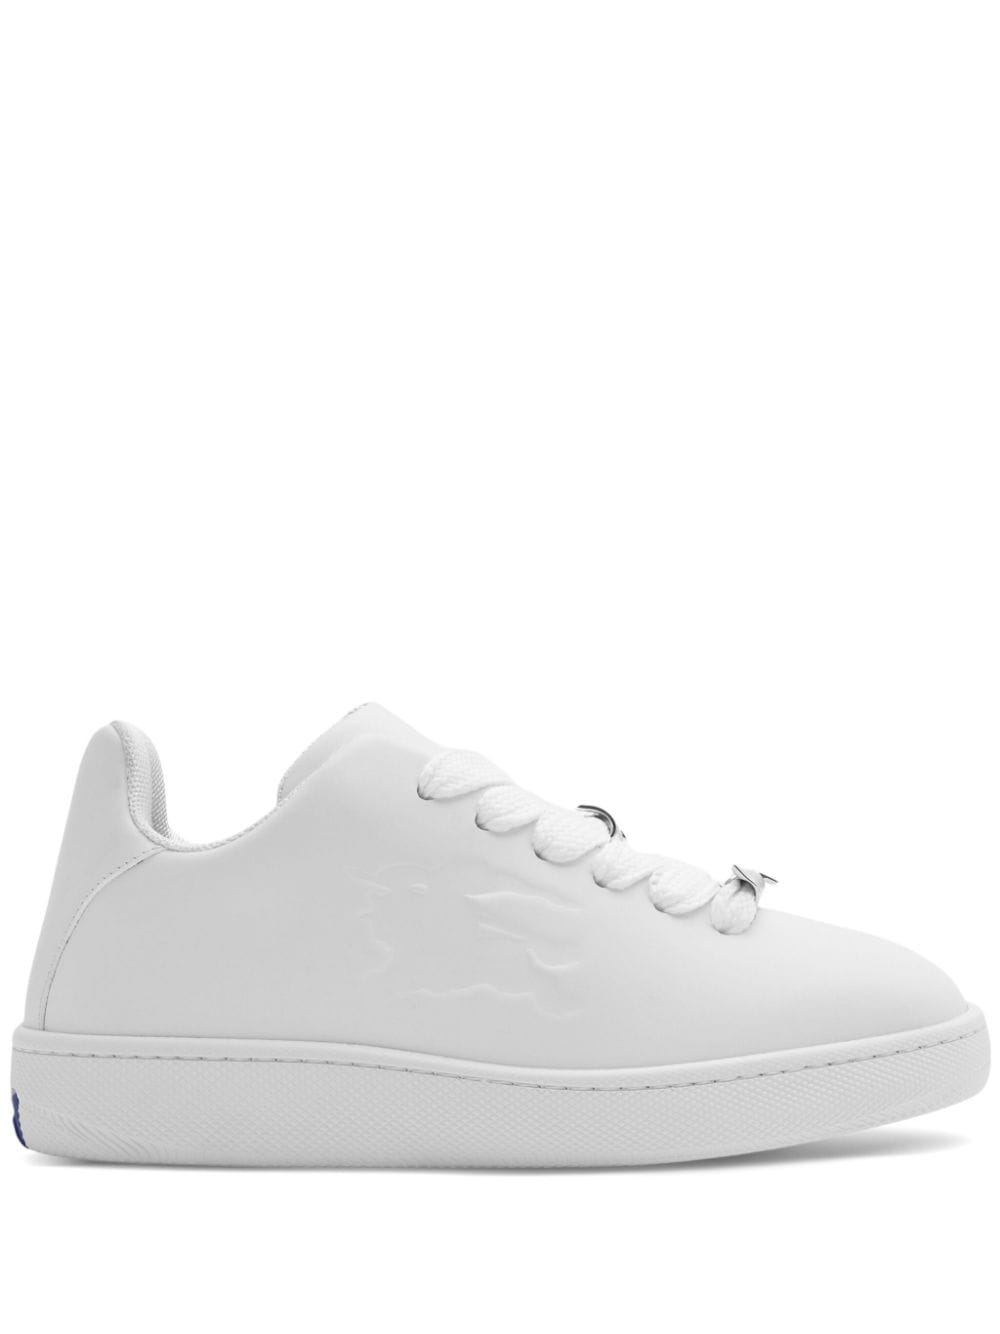 Box leather sneakers<BR/><BR/><BR/>